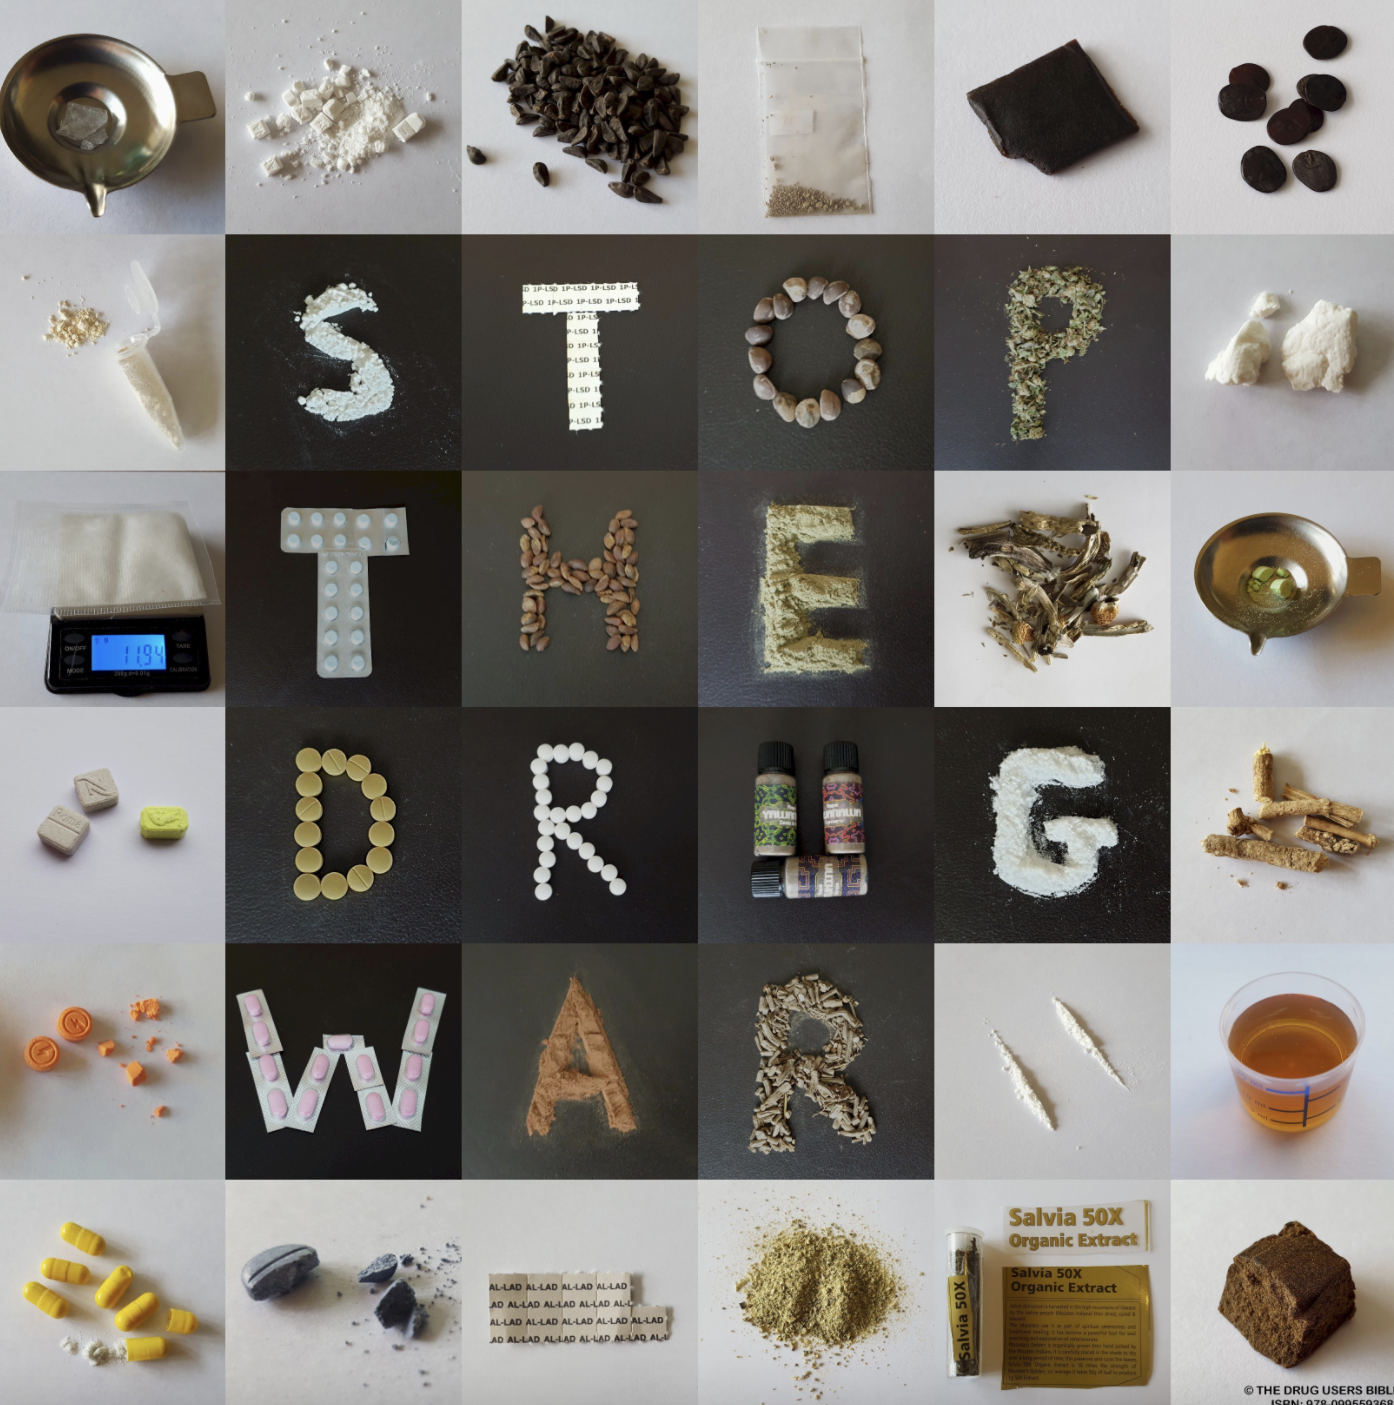 Stop the Drug War spelt out using drugs